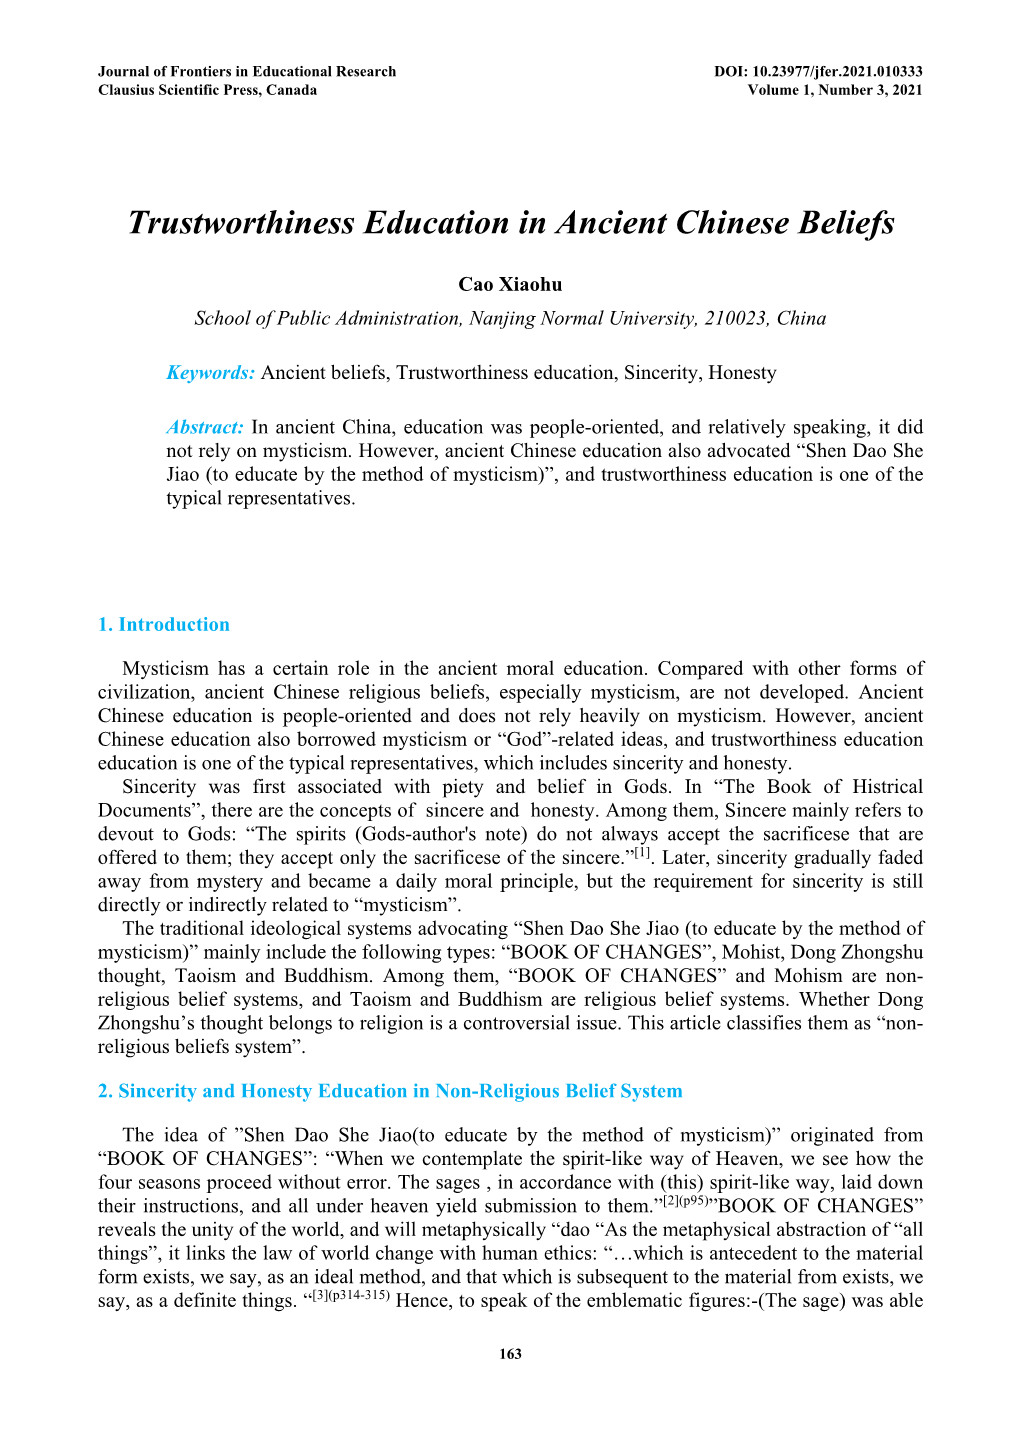 Trustworthiness Education in Ancient Chinese Beliefs